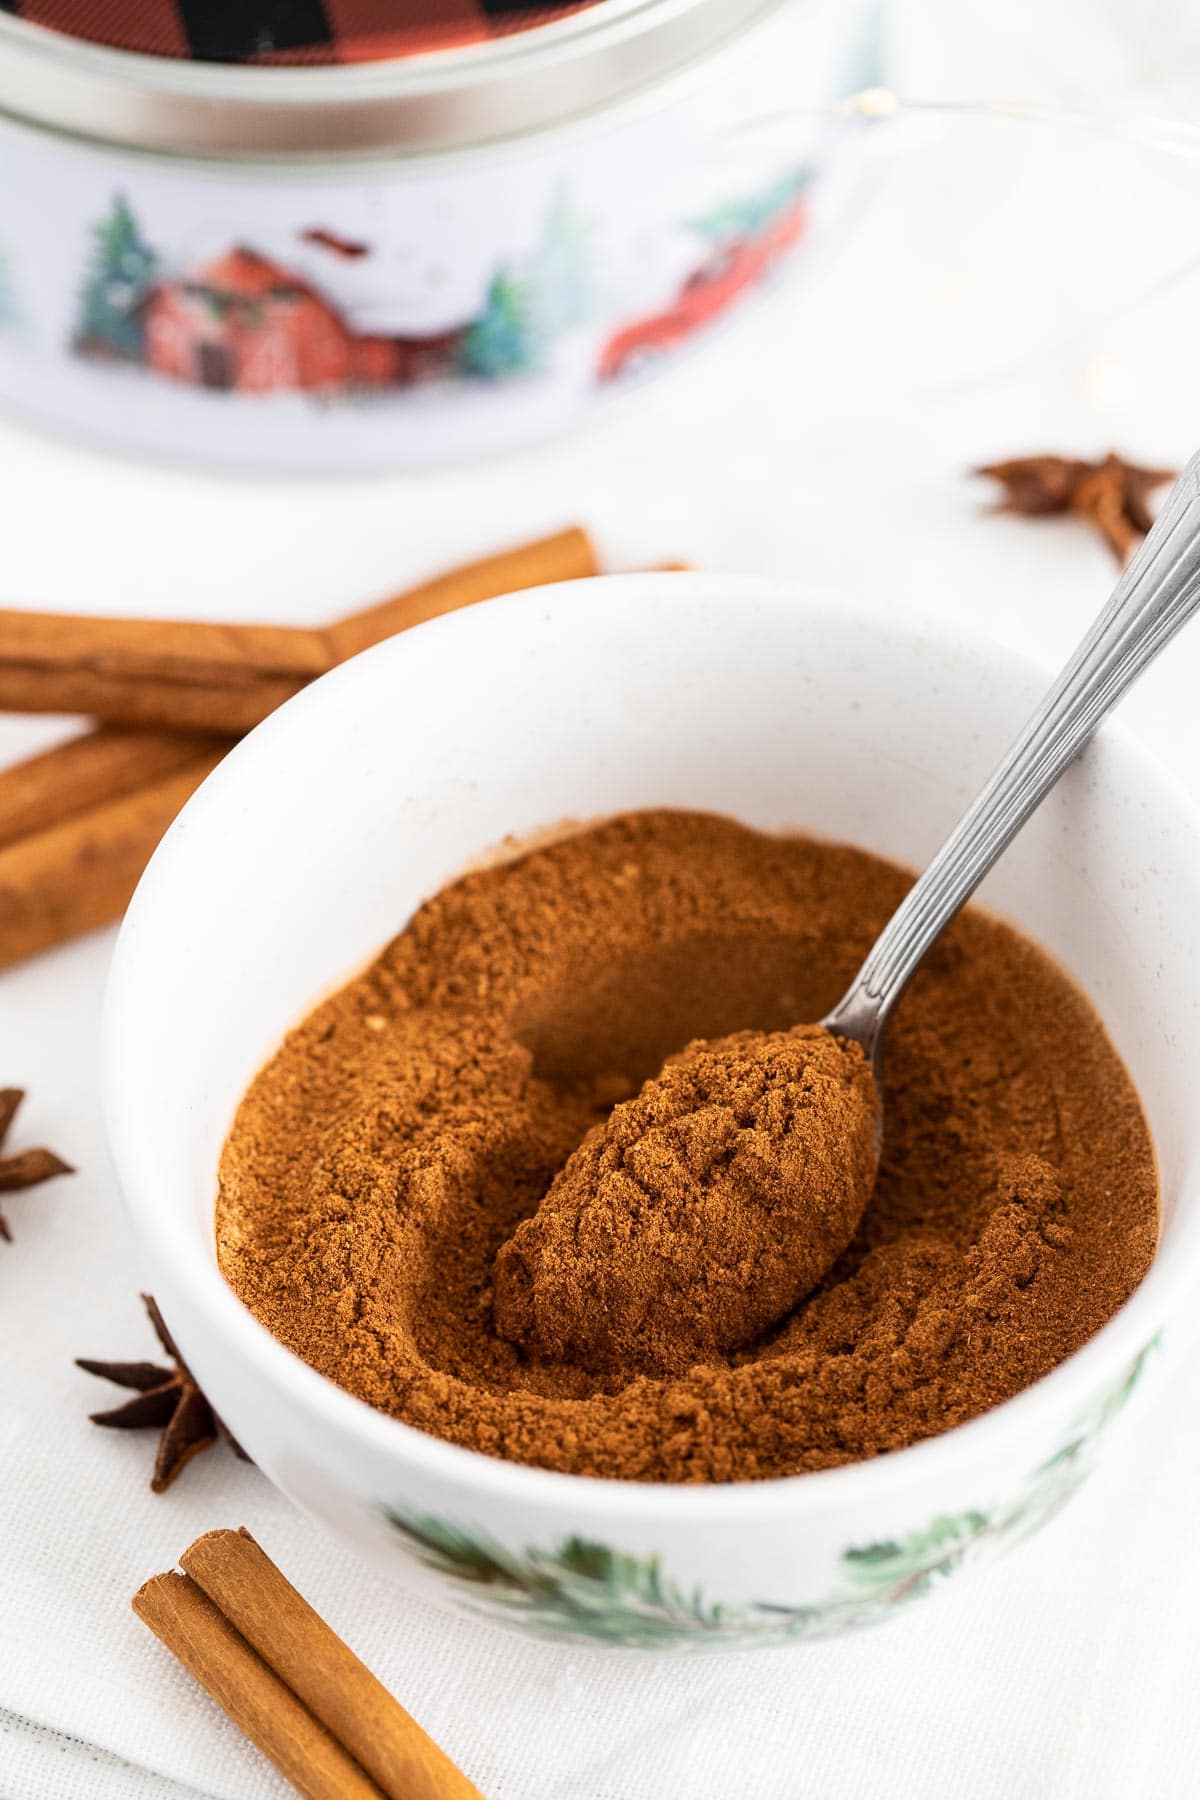 A white bowl filled with ground spices and a spoon in it, next to cinnamon sticks and star anise.